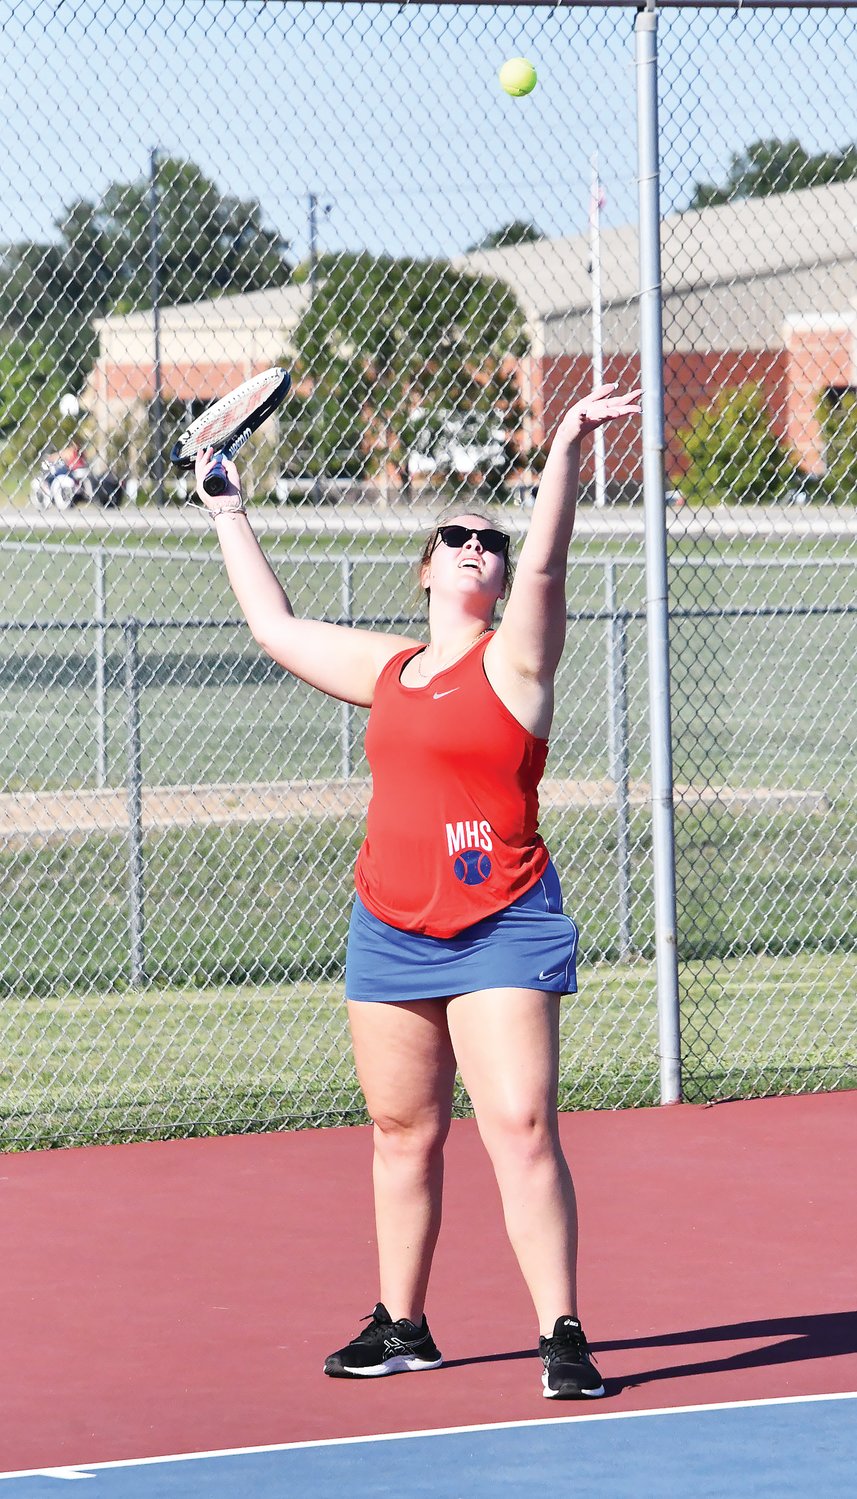 Aleiya Myers serves during a North Central Missouri Conference duel against Fulton. Myers’ serve is tough to return, with its spin and power. She won in both singles and doubles during the opener on Friday, Aug. 26.